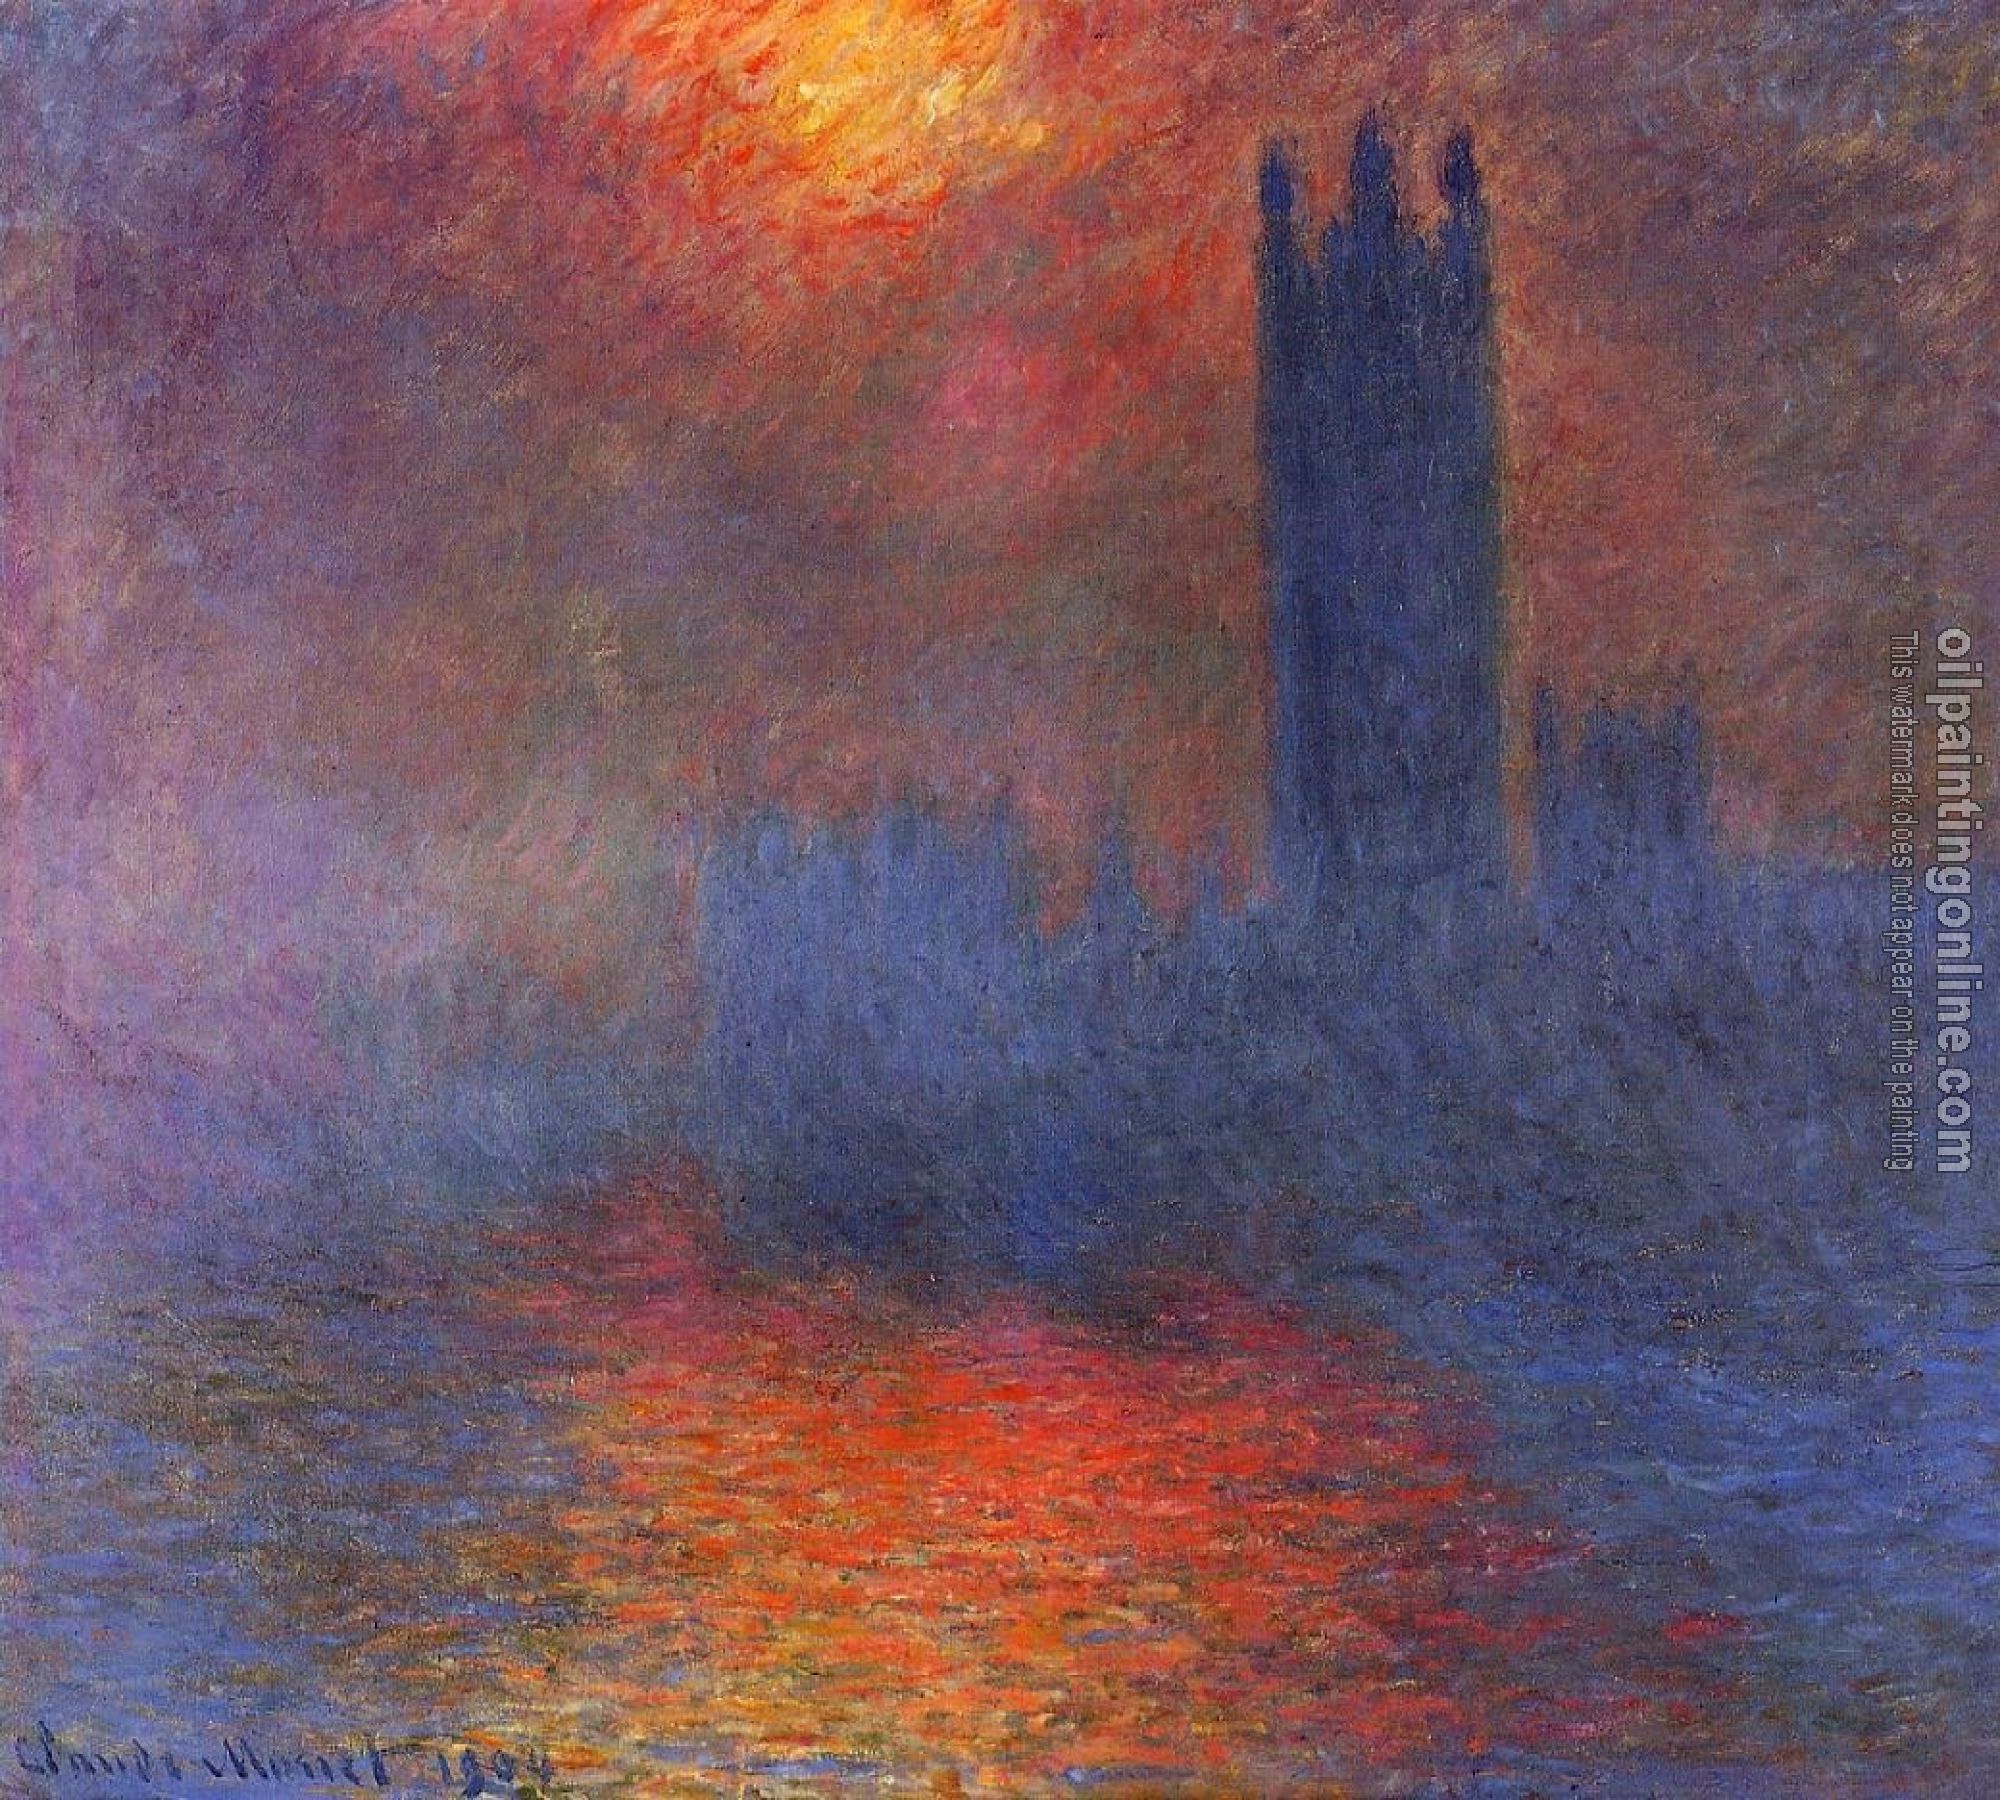 Monet, Claude Oscar - Houses of Parliament, Effect of Sunlight in the Fog